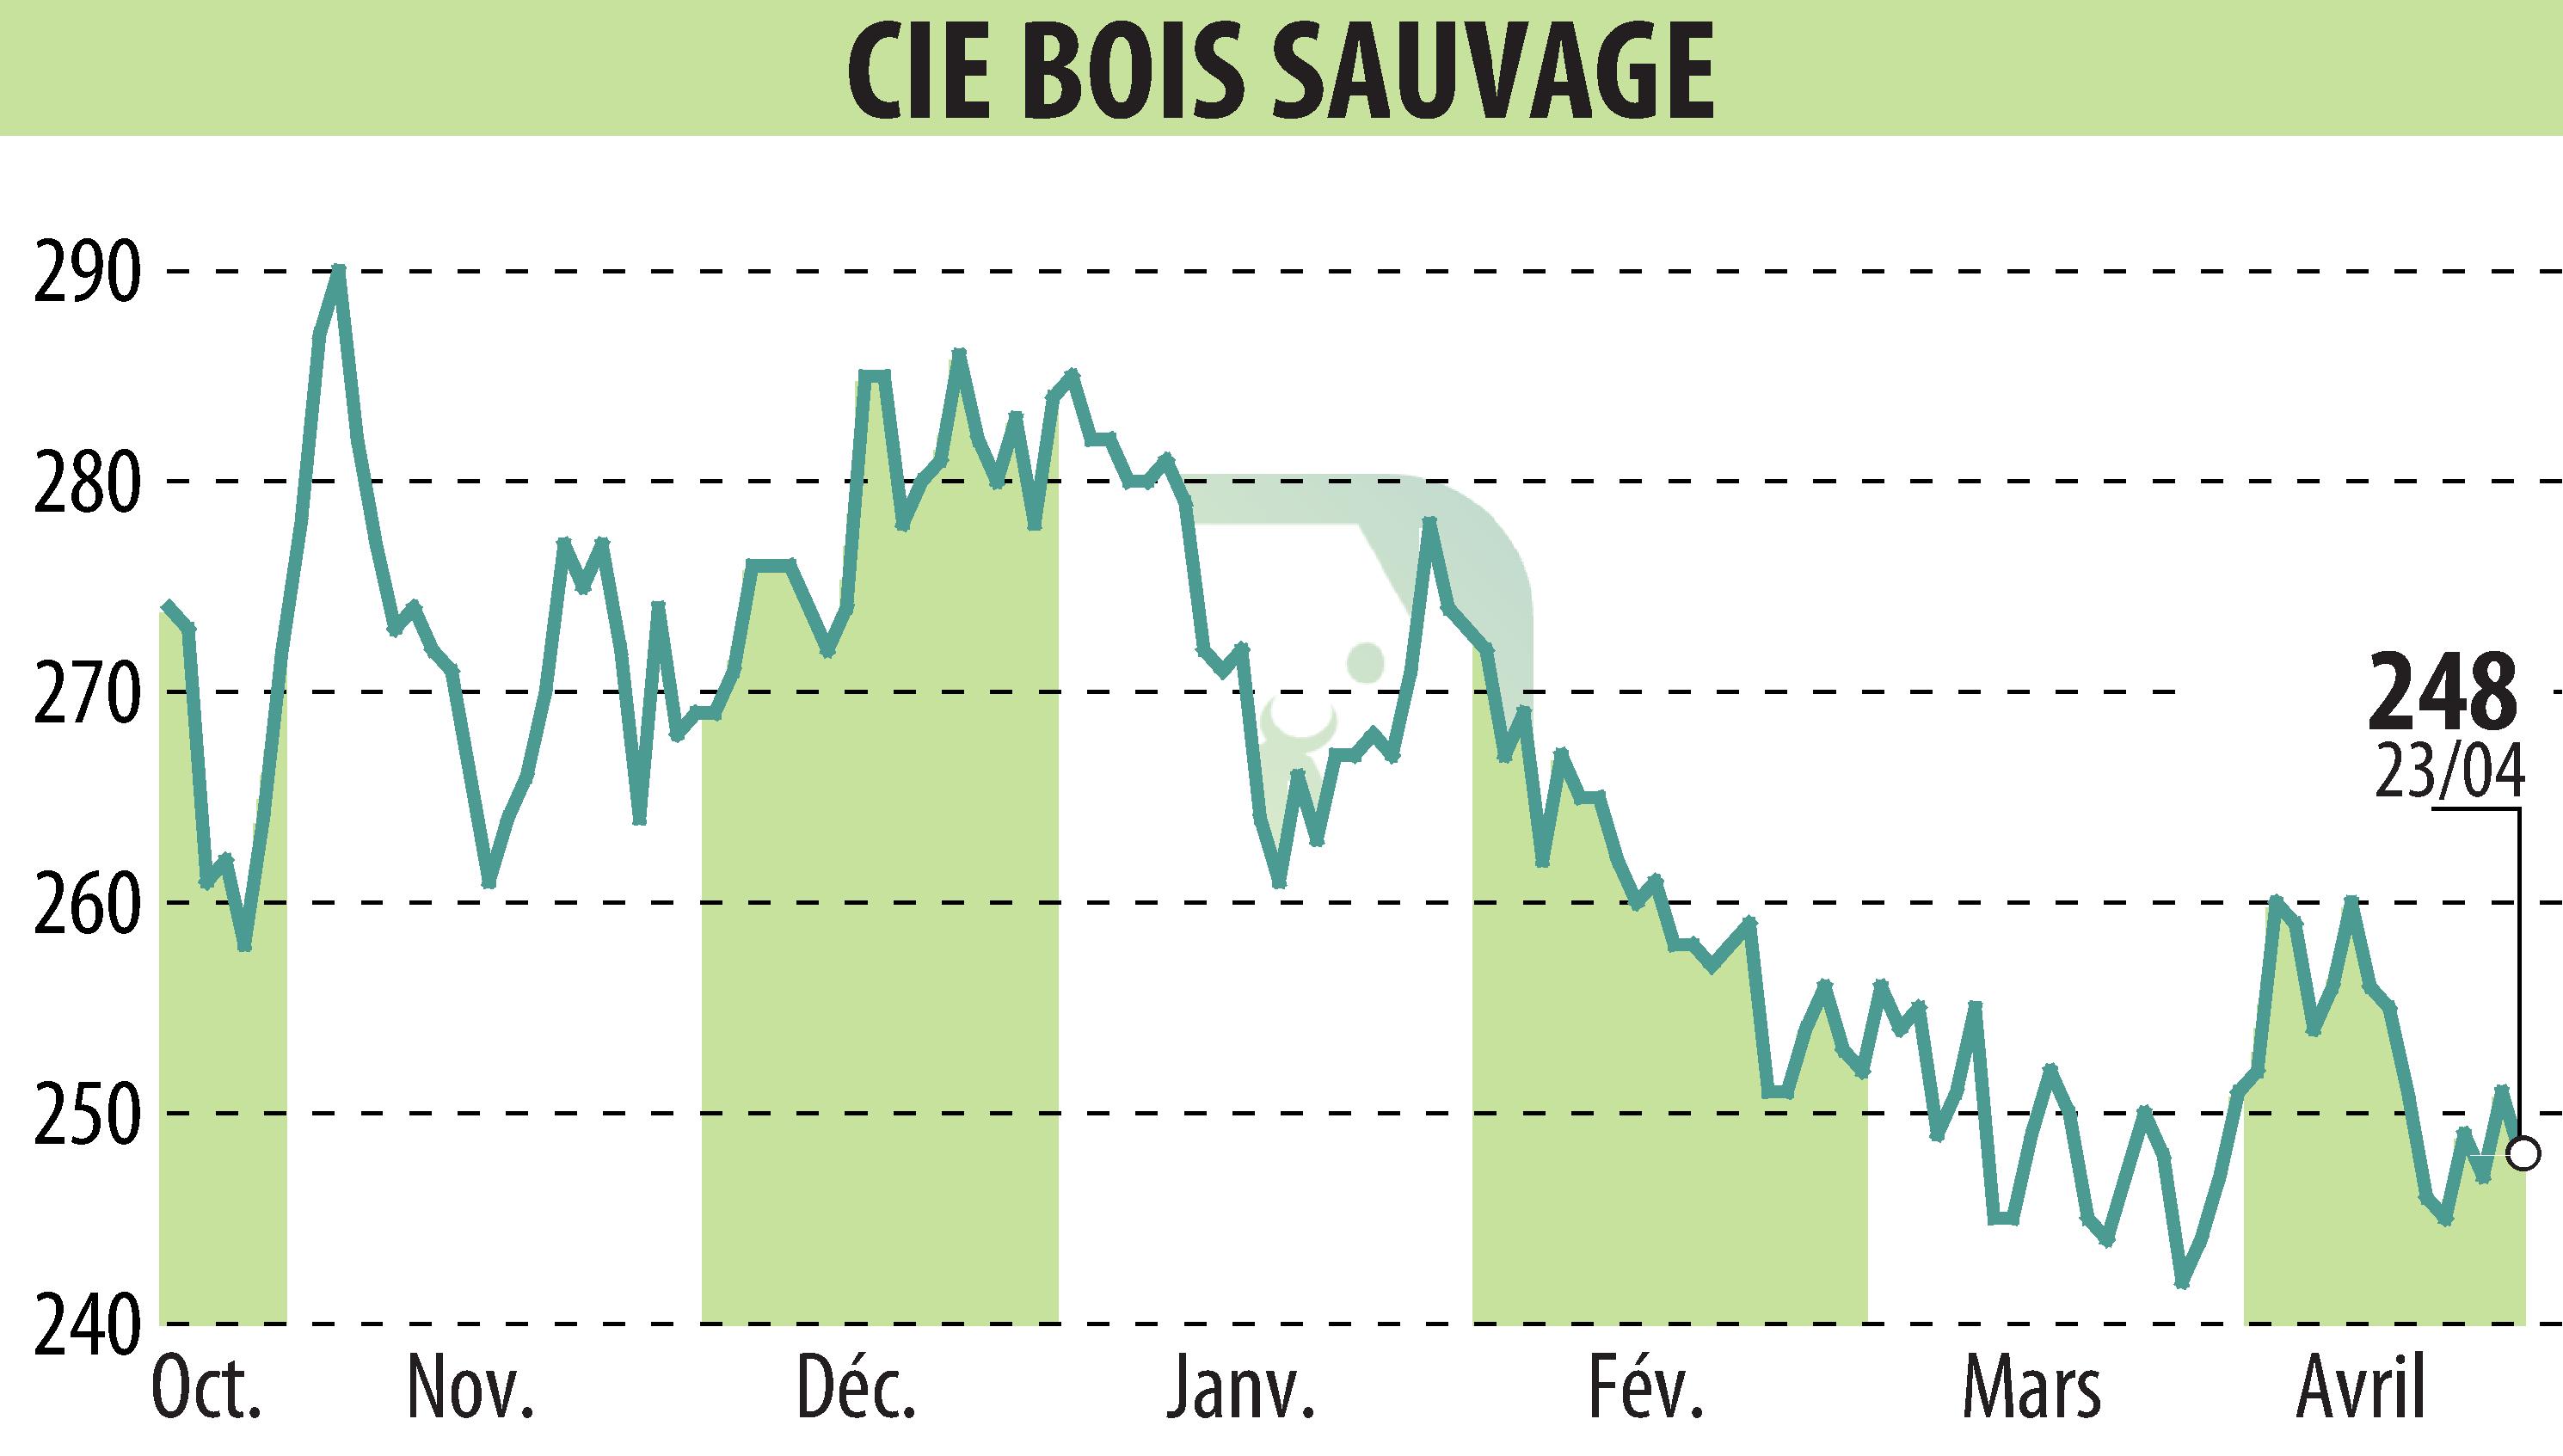 Stock price chart of COMPAGNIE BOIS SAUVAGE (EBR:COMB) showing fluctuations.